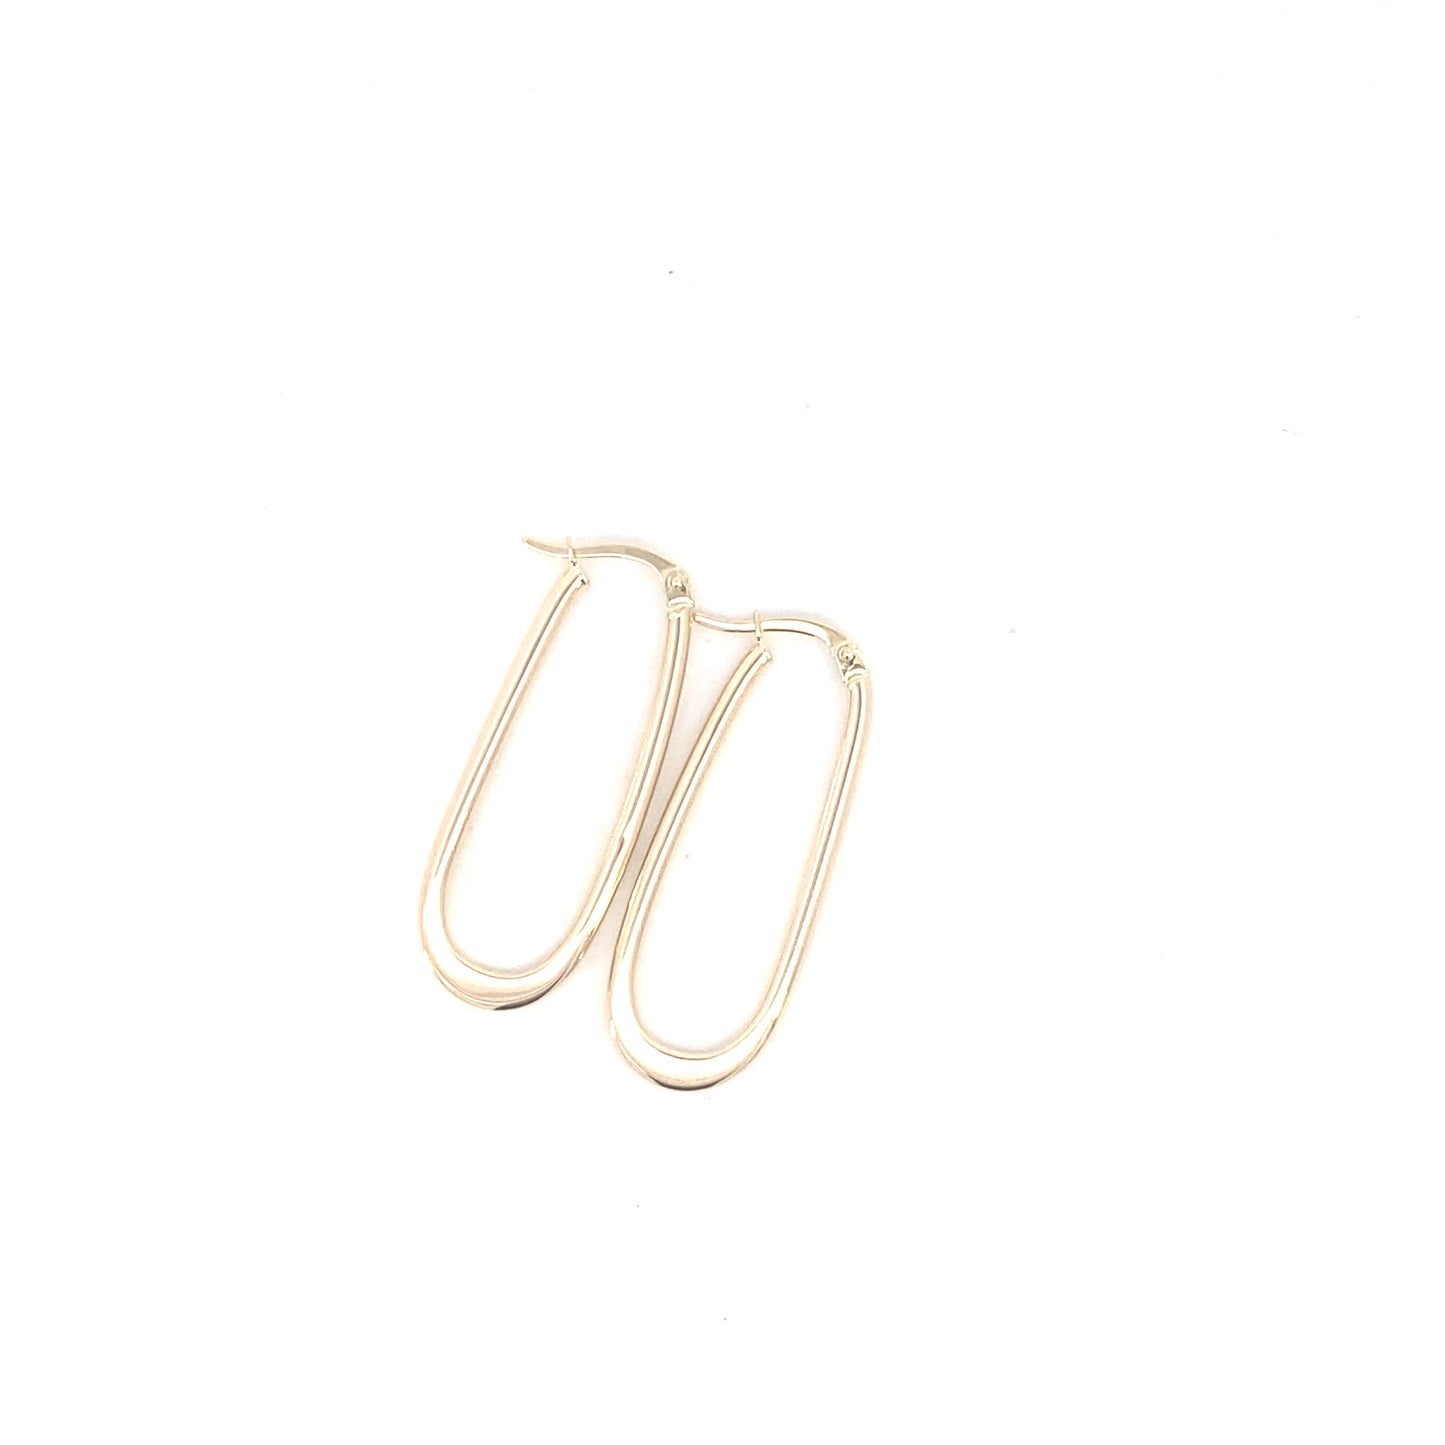 14K Gold Long Oval Earrings Hoops | Luby Gold Collection | Luby 